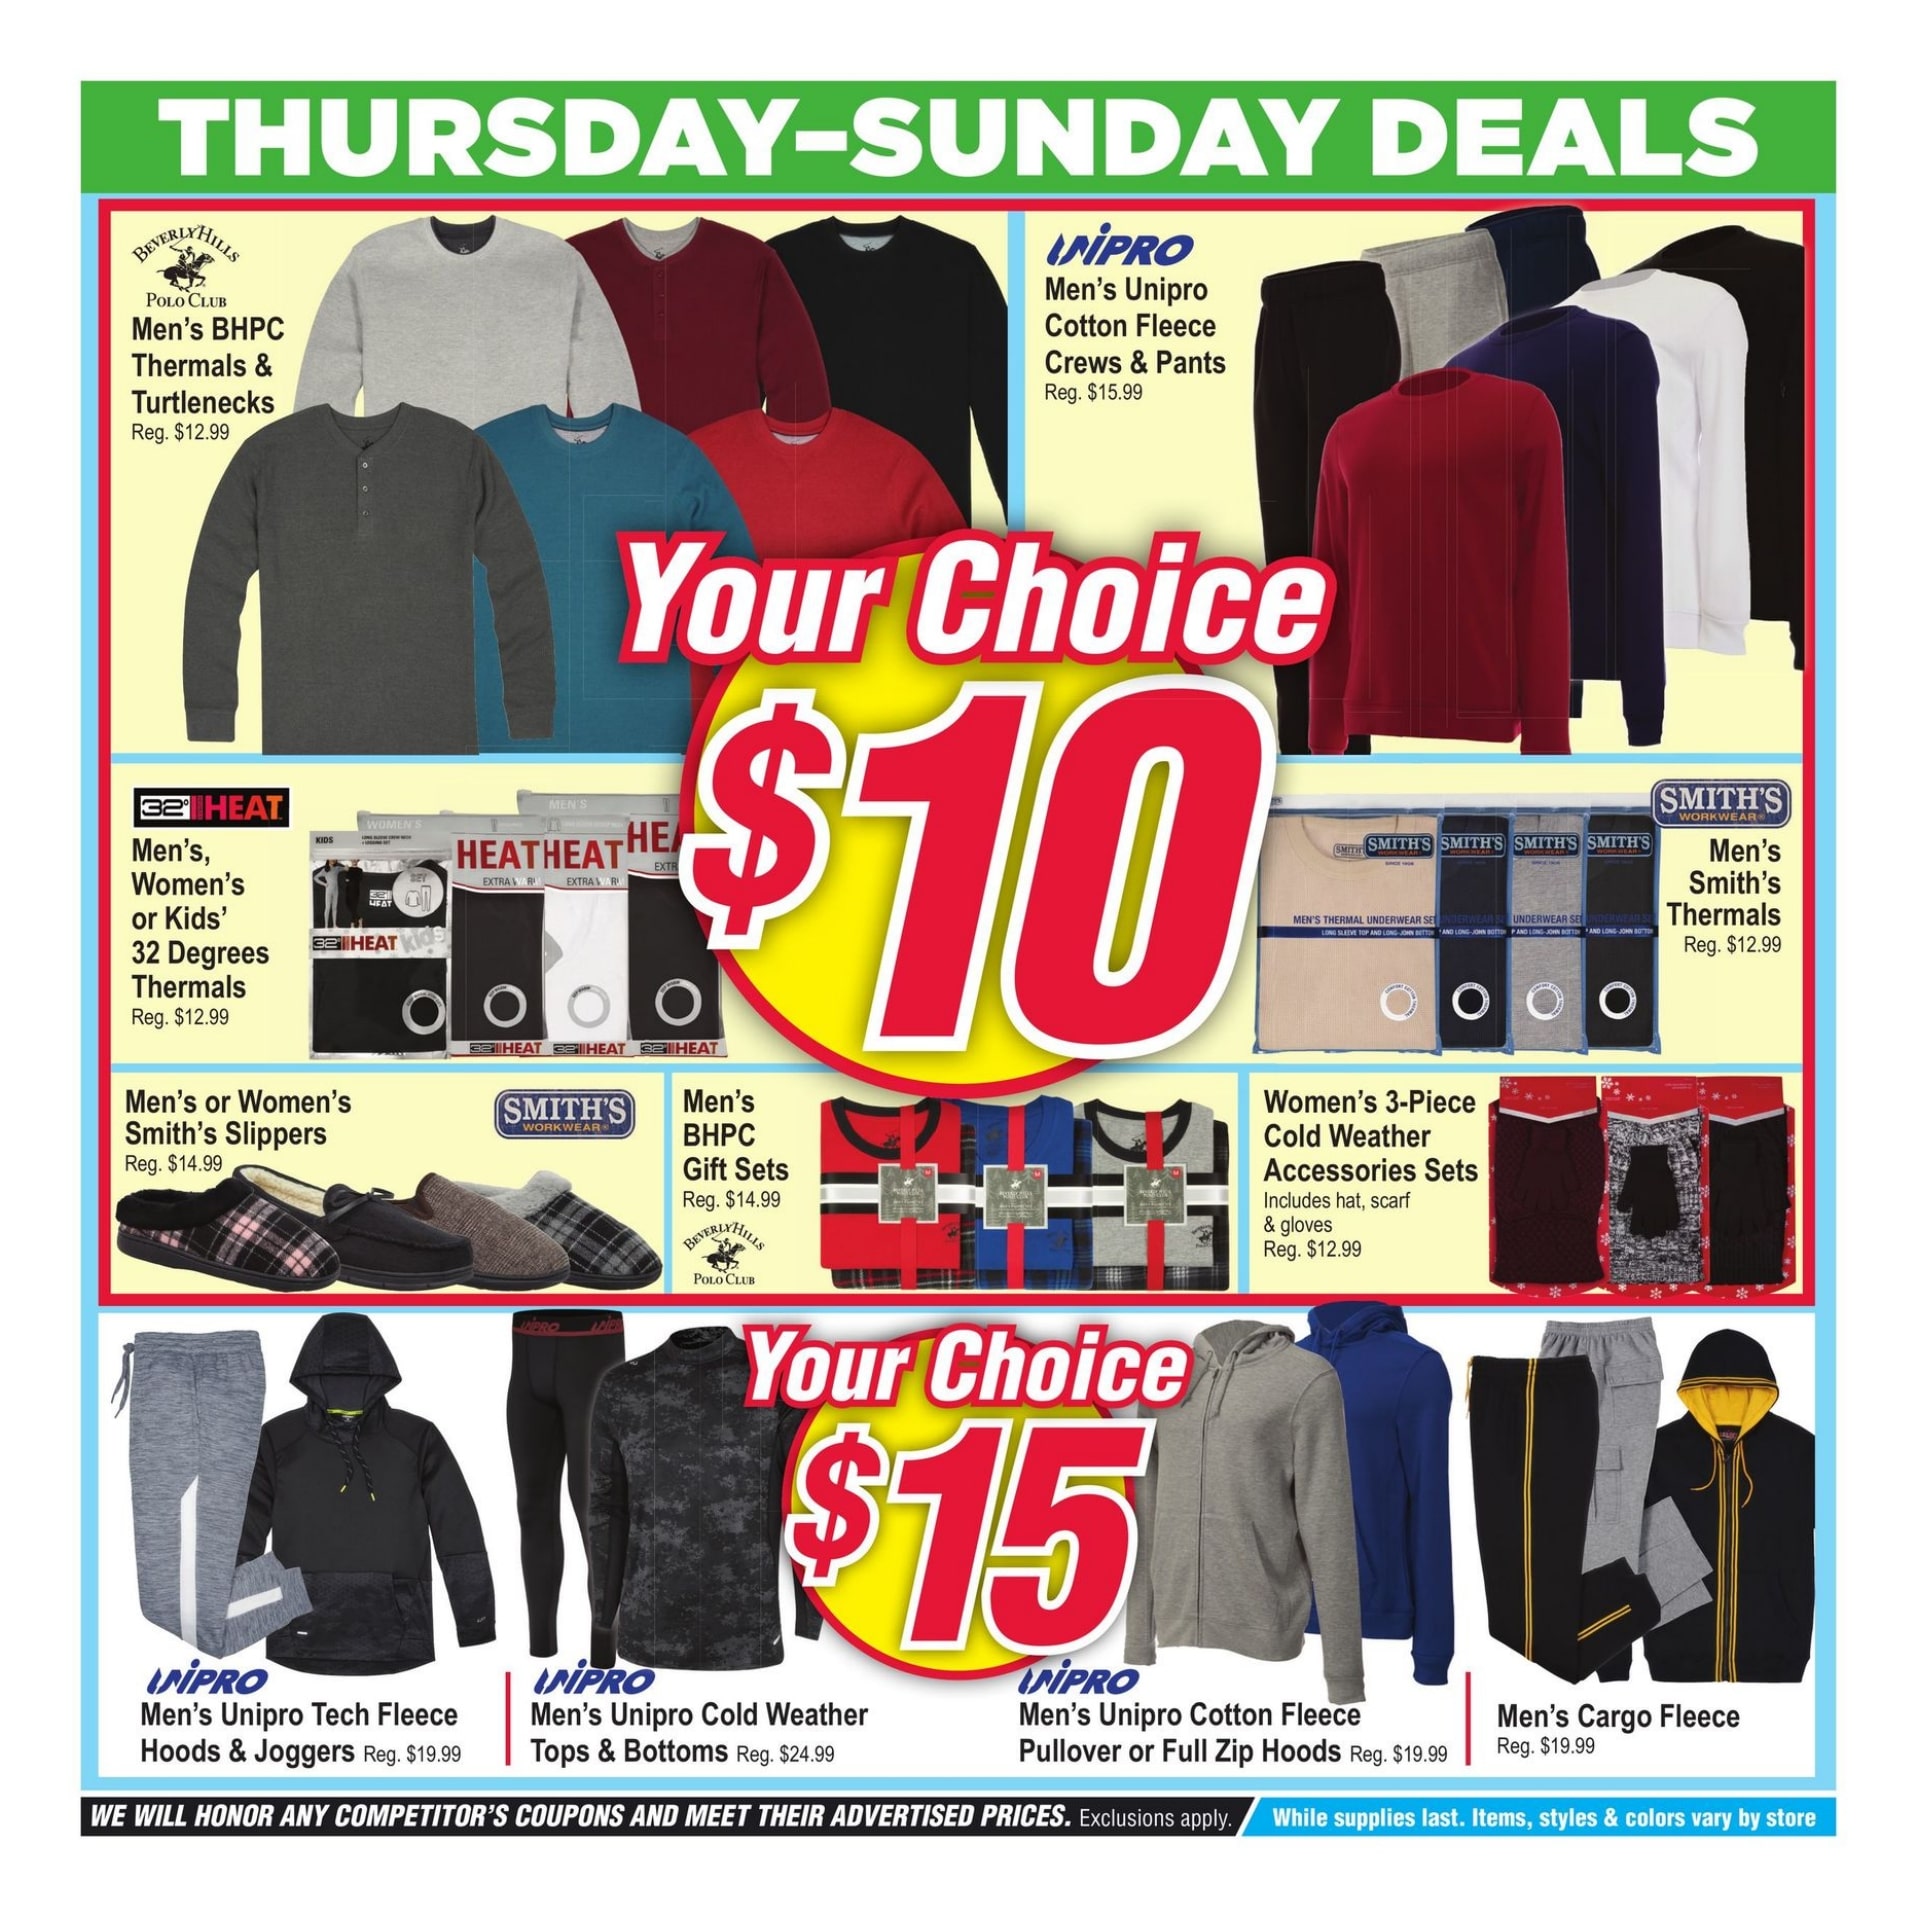 Modell's Sporting Goods Black Friday Ad 2018 - Does Viator Have Black Friday Deals